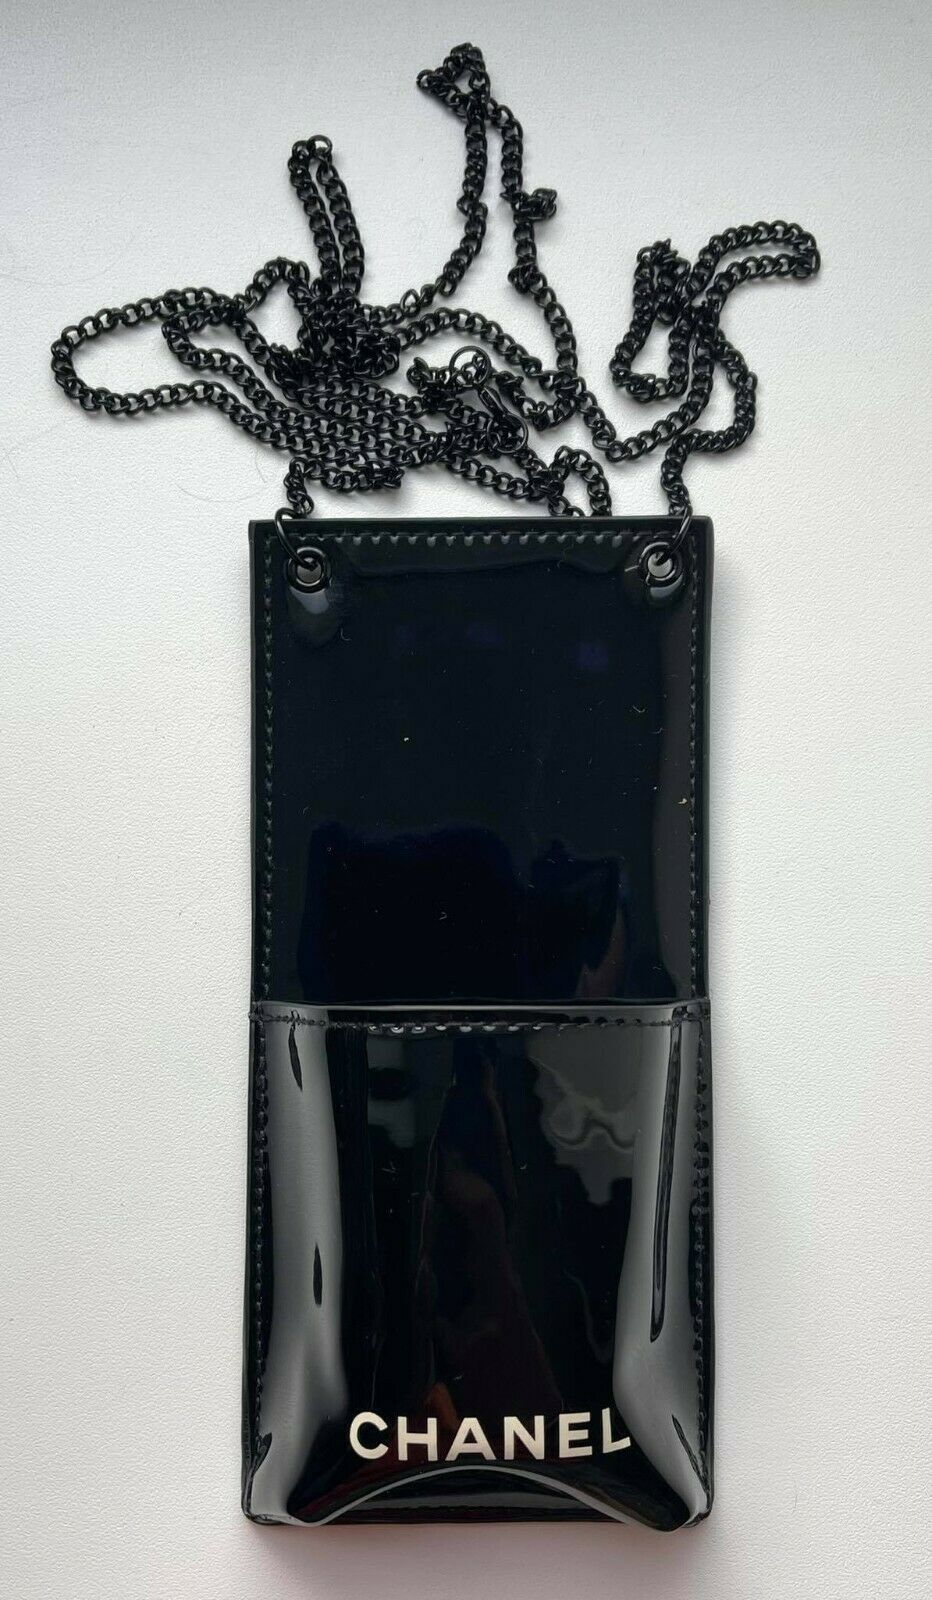 Chanel Bag Case With Chain Black Les Beiges Vip Gift